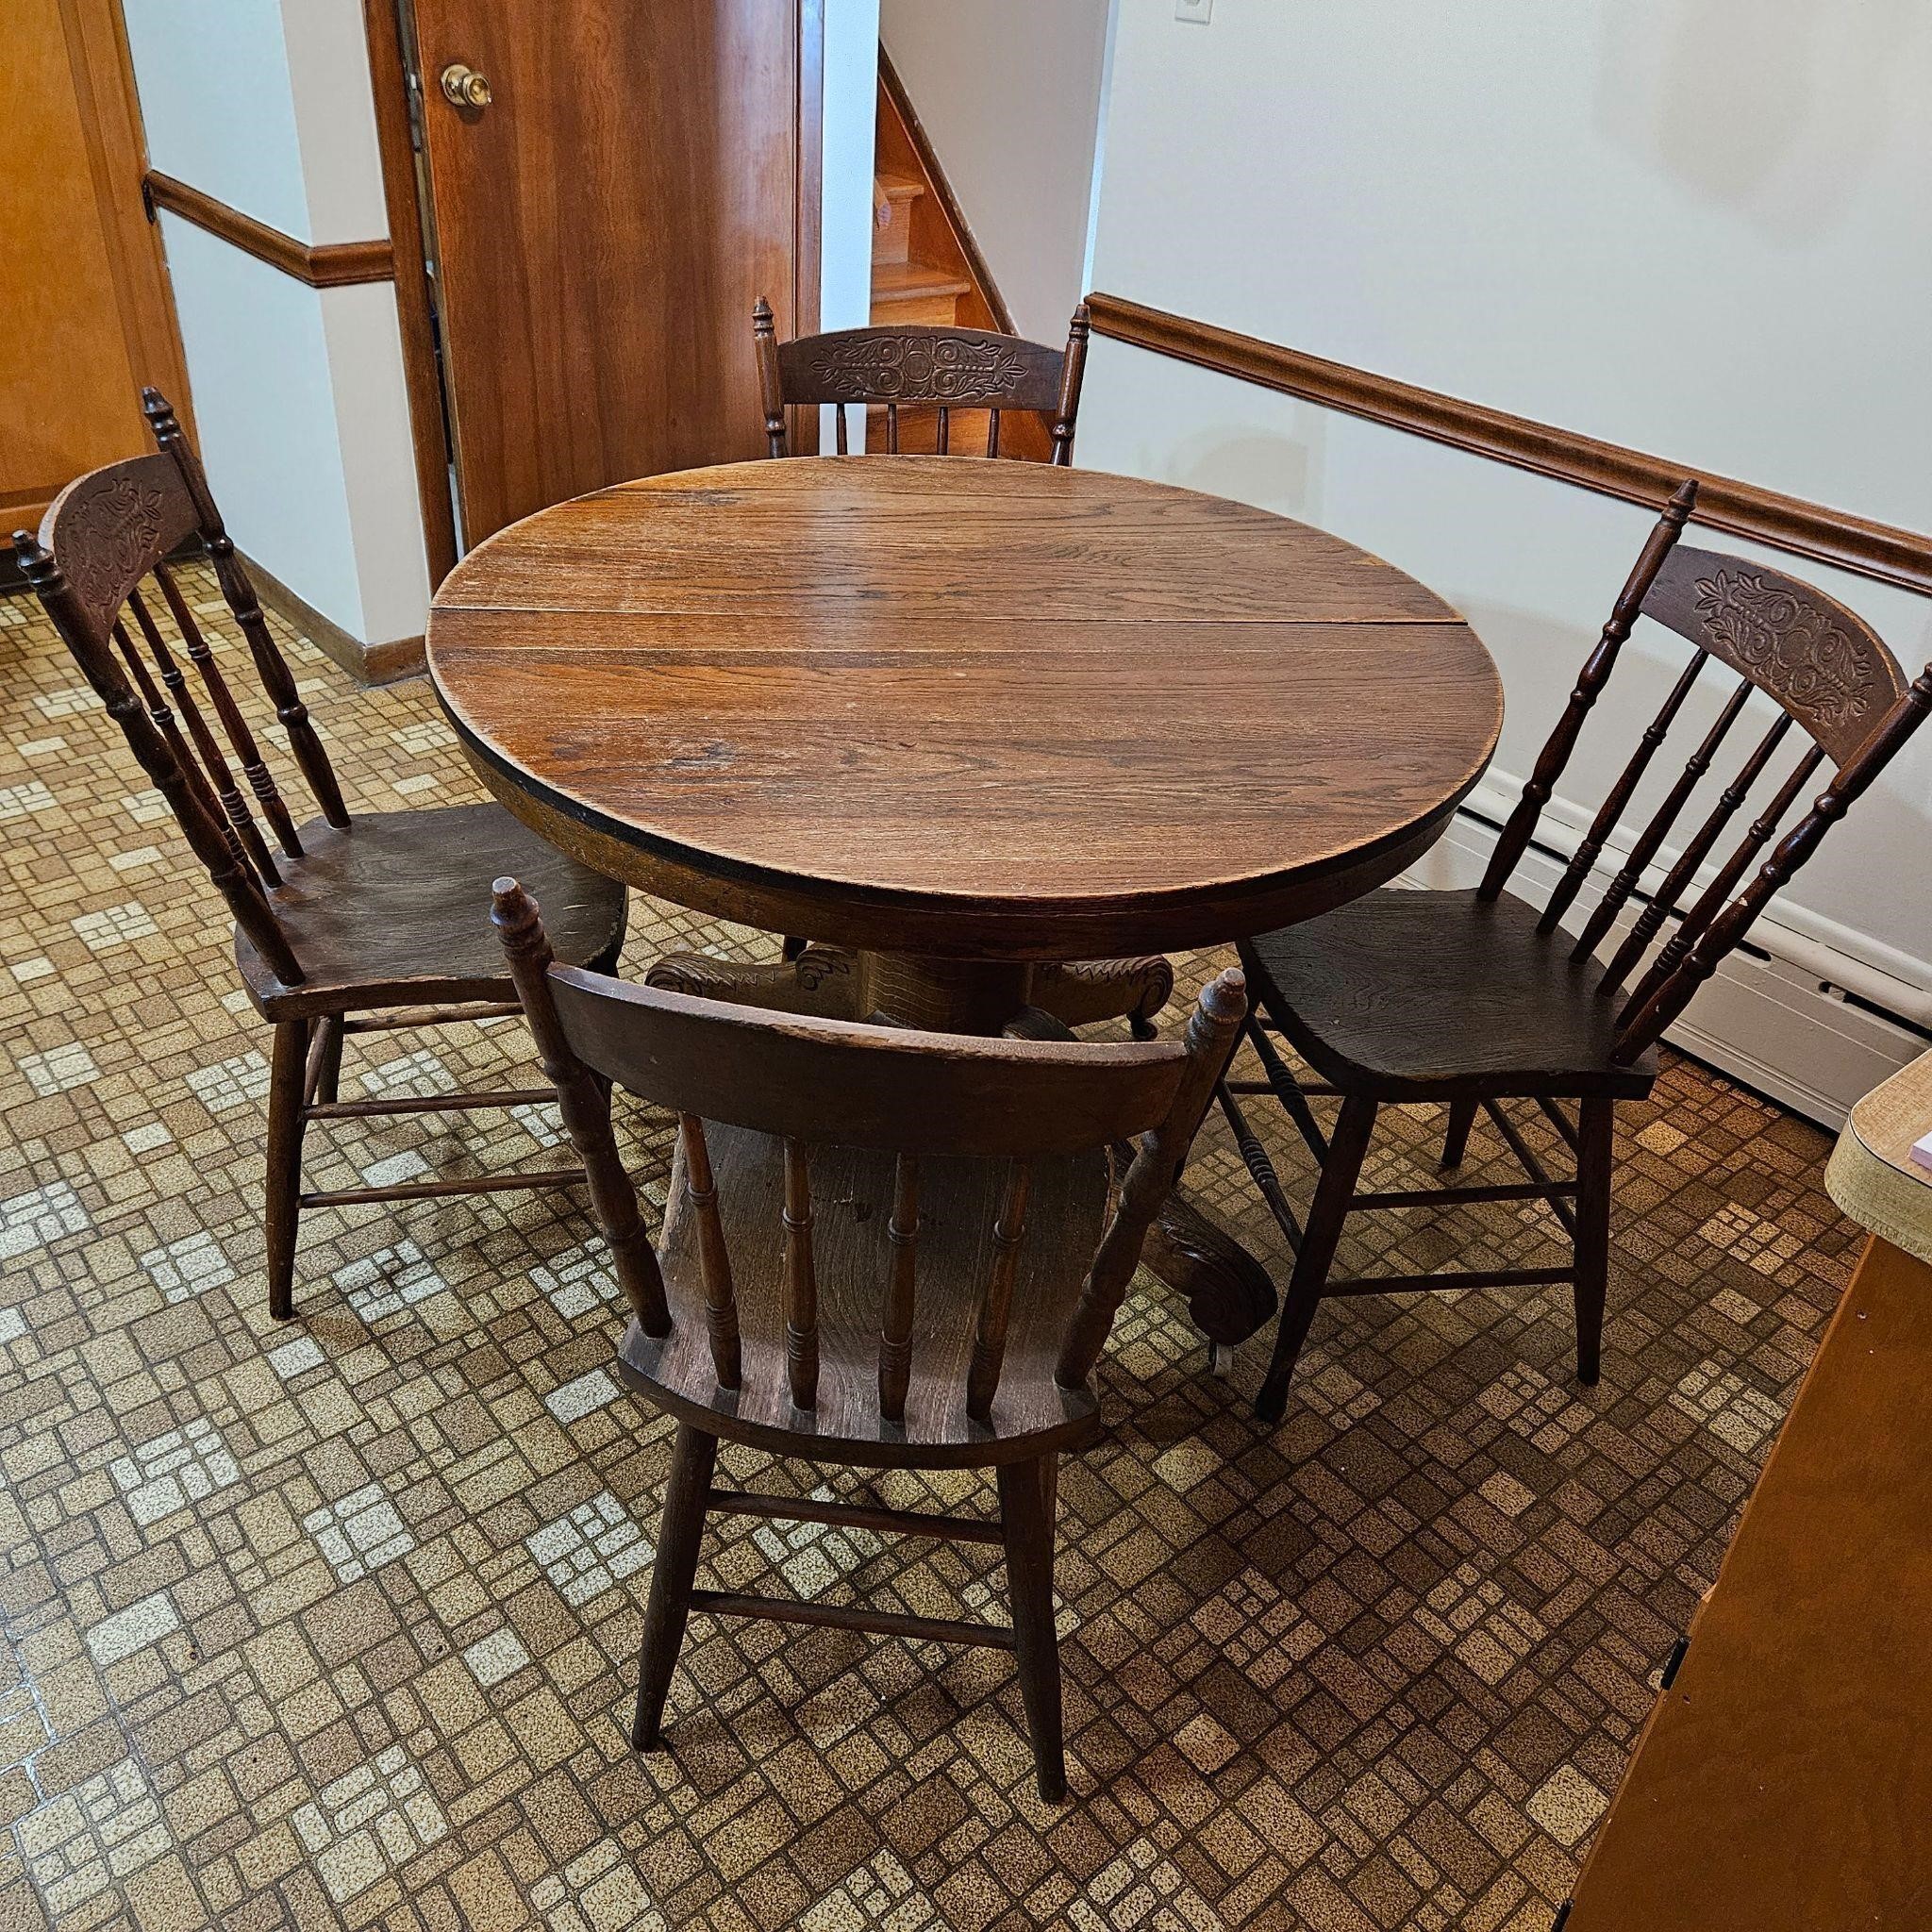 Vintage Wood Dining Table & 4 Chairs